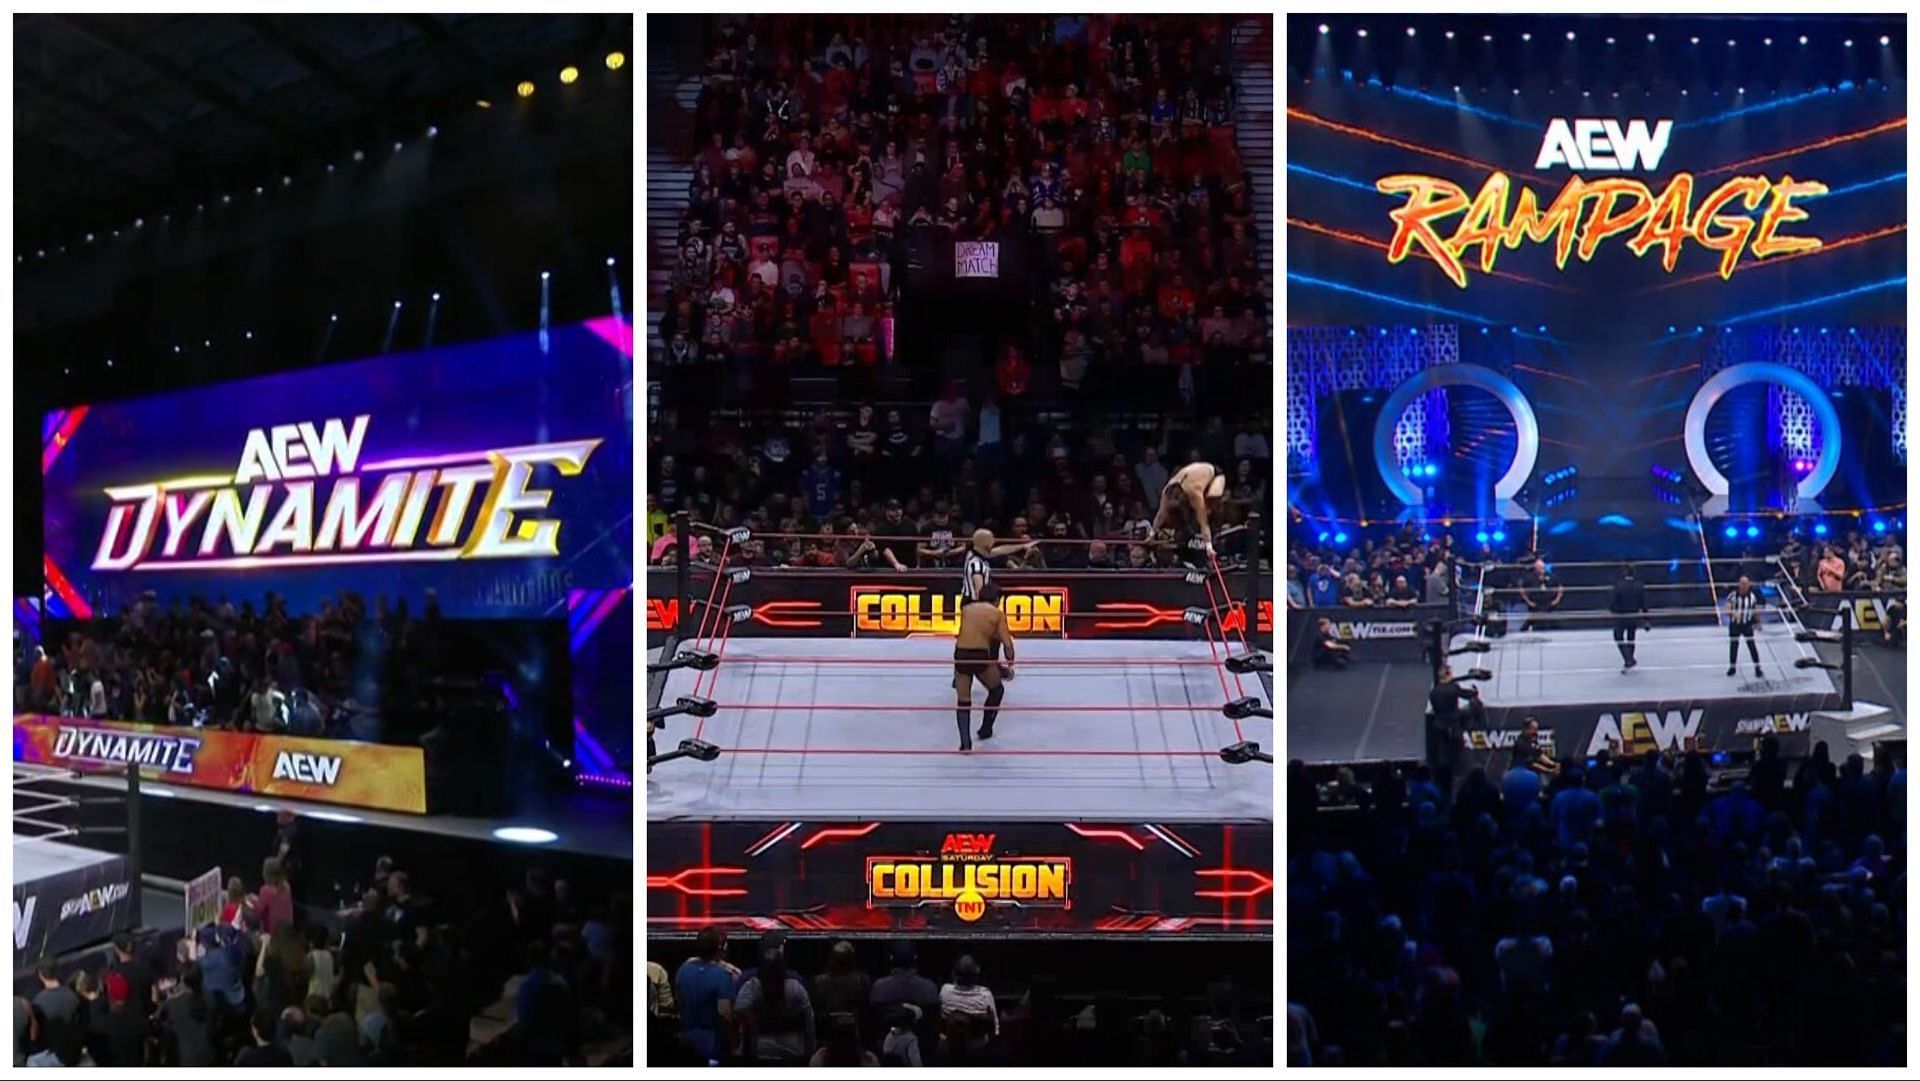 The sets for AEW Dynamite, Rampage, and Collision